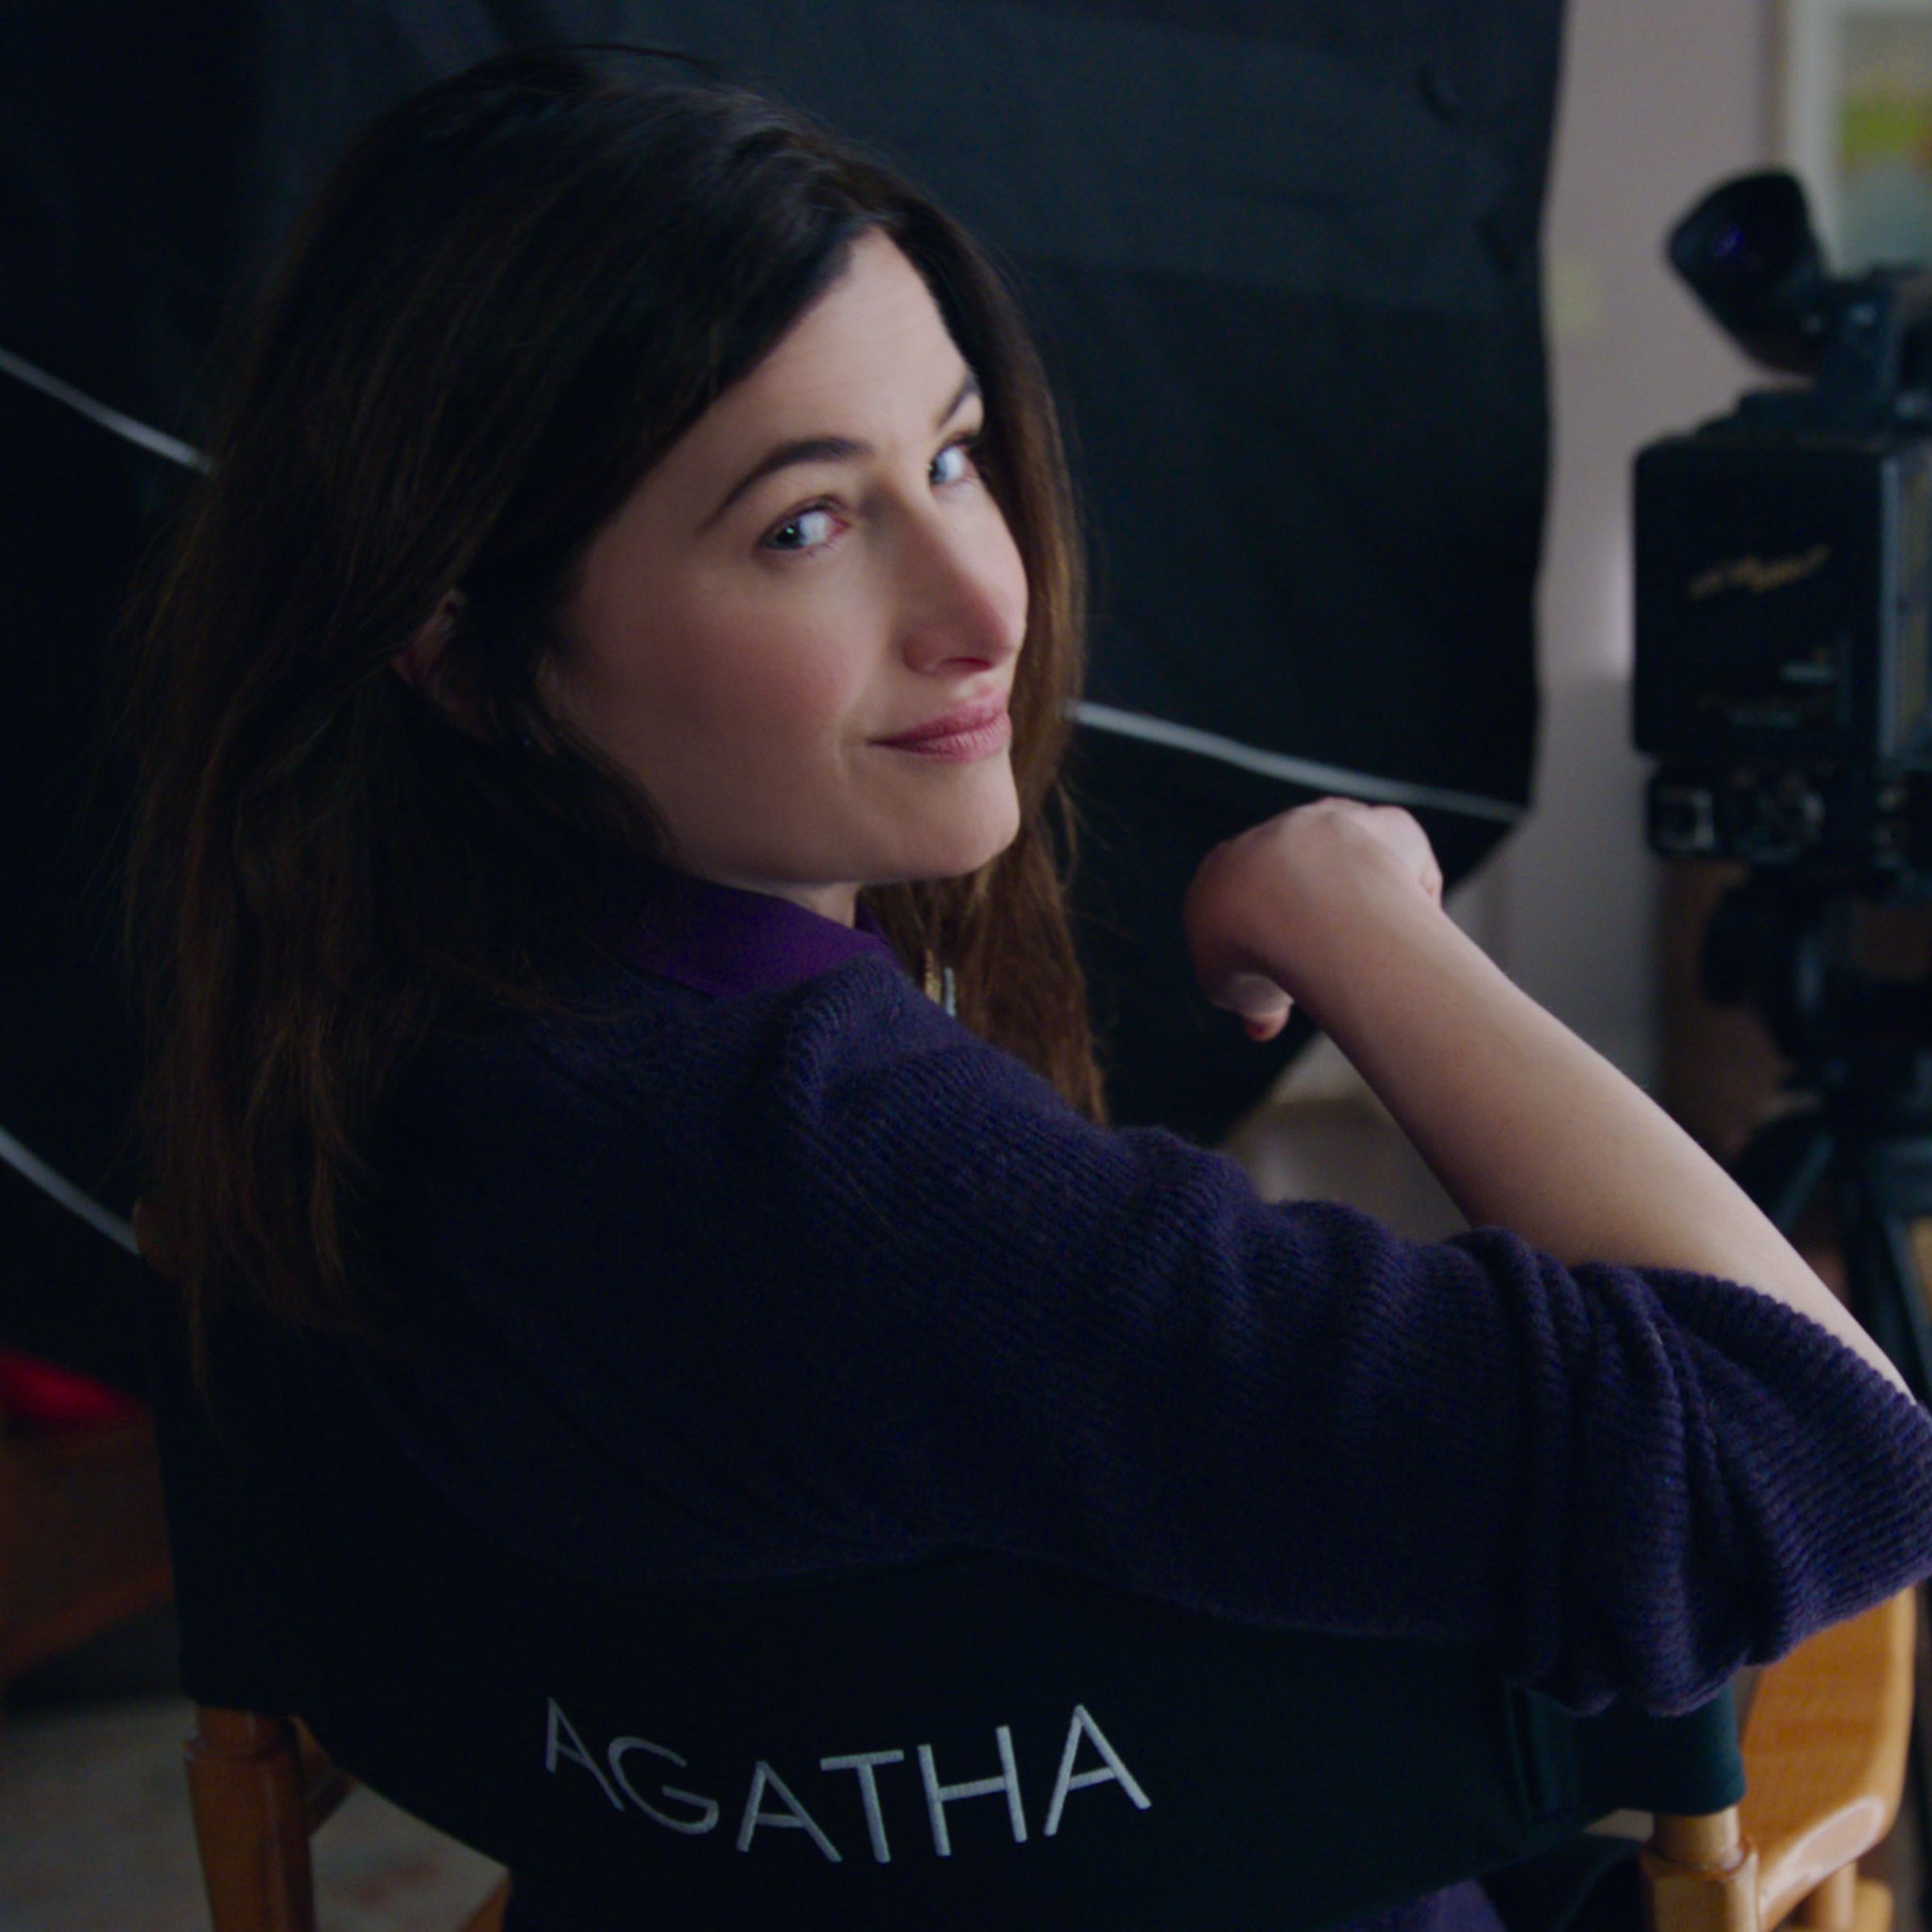 A woman in a purple shirt looking backwards over a director’s chair on a film set.